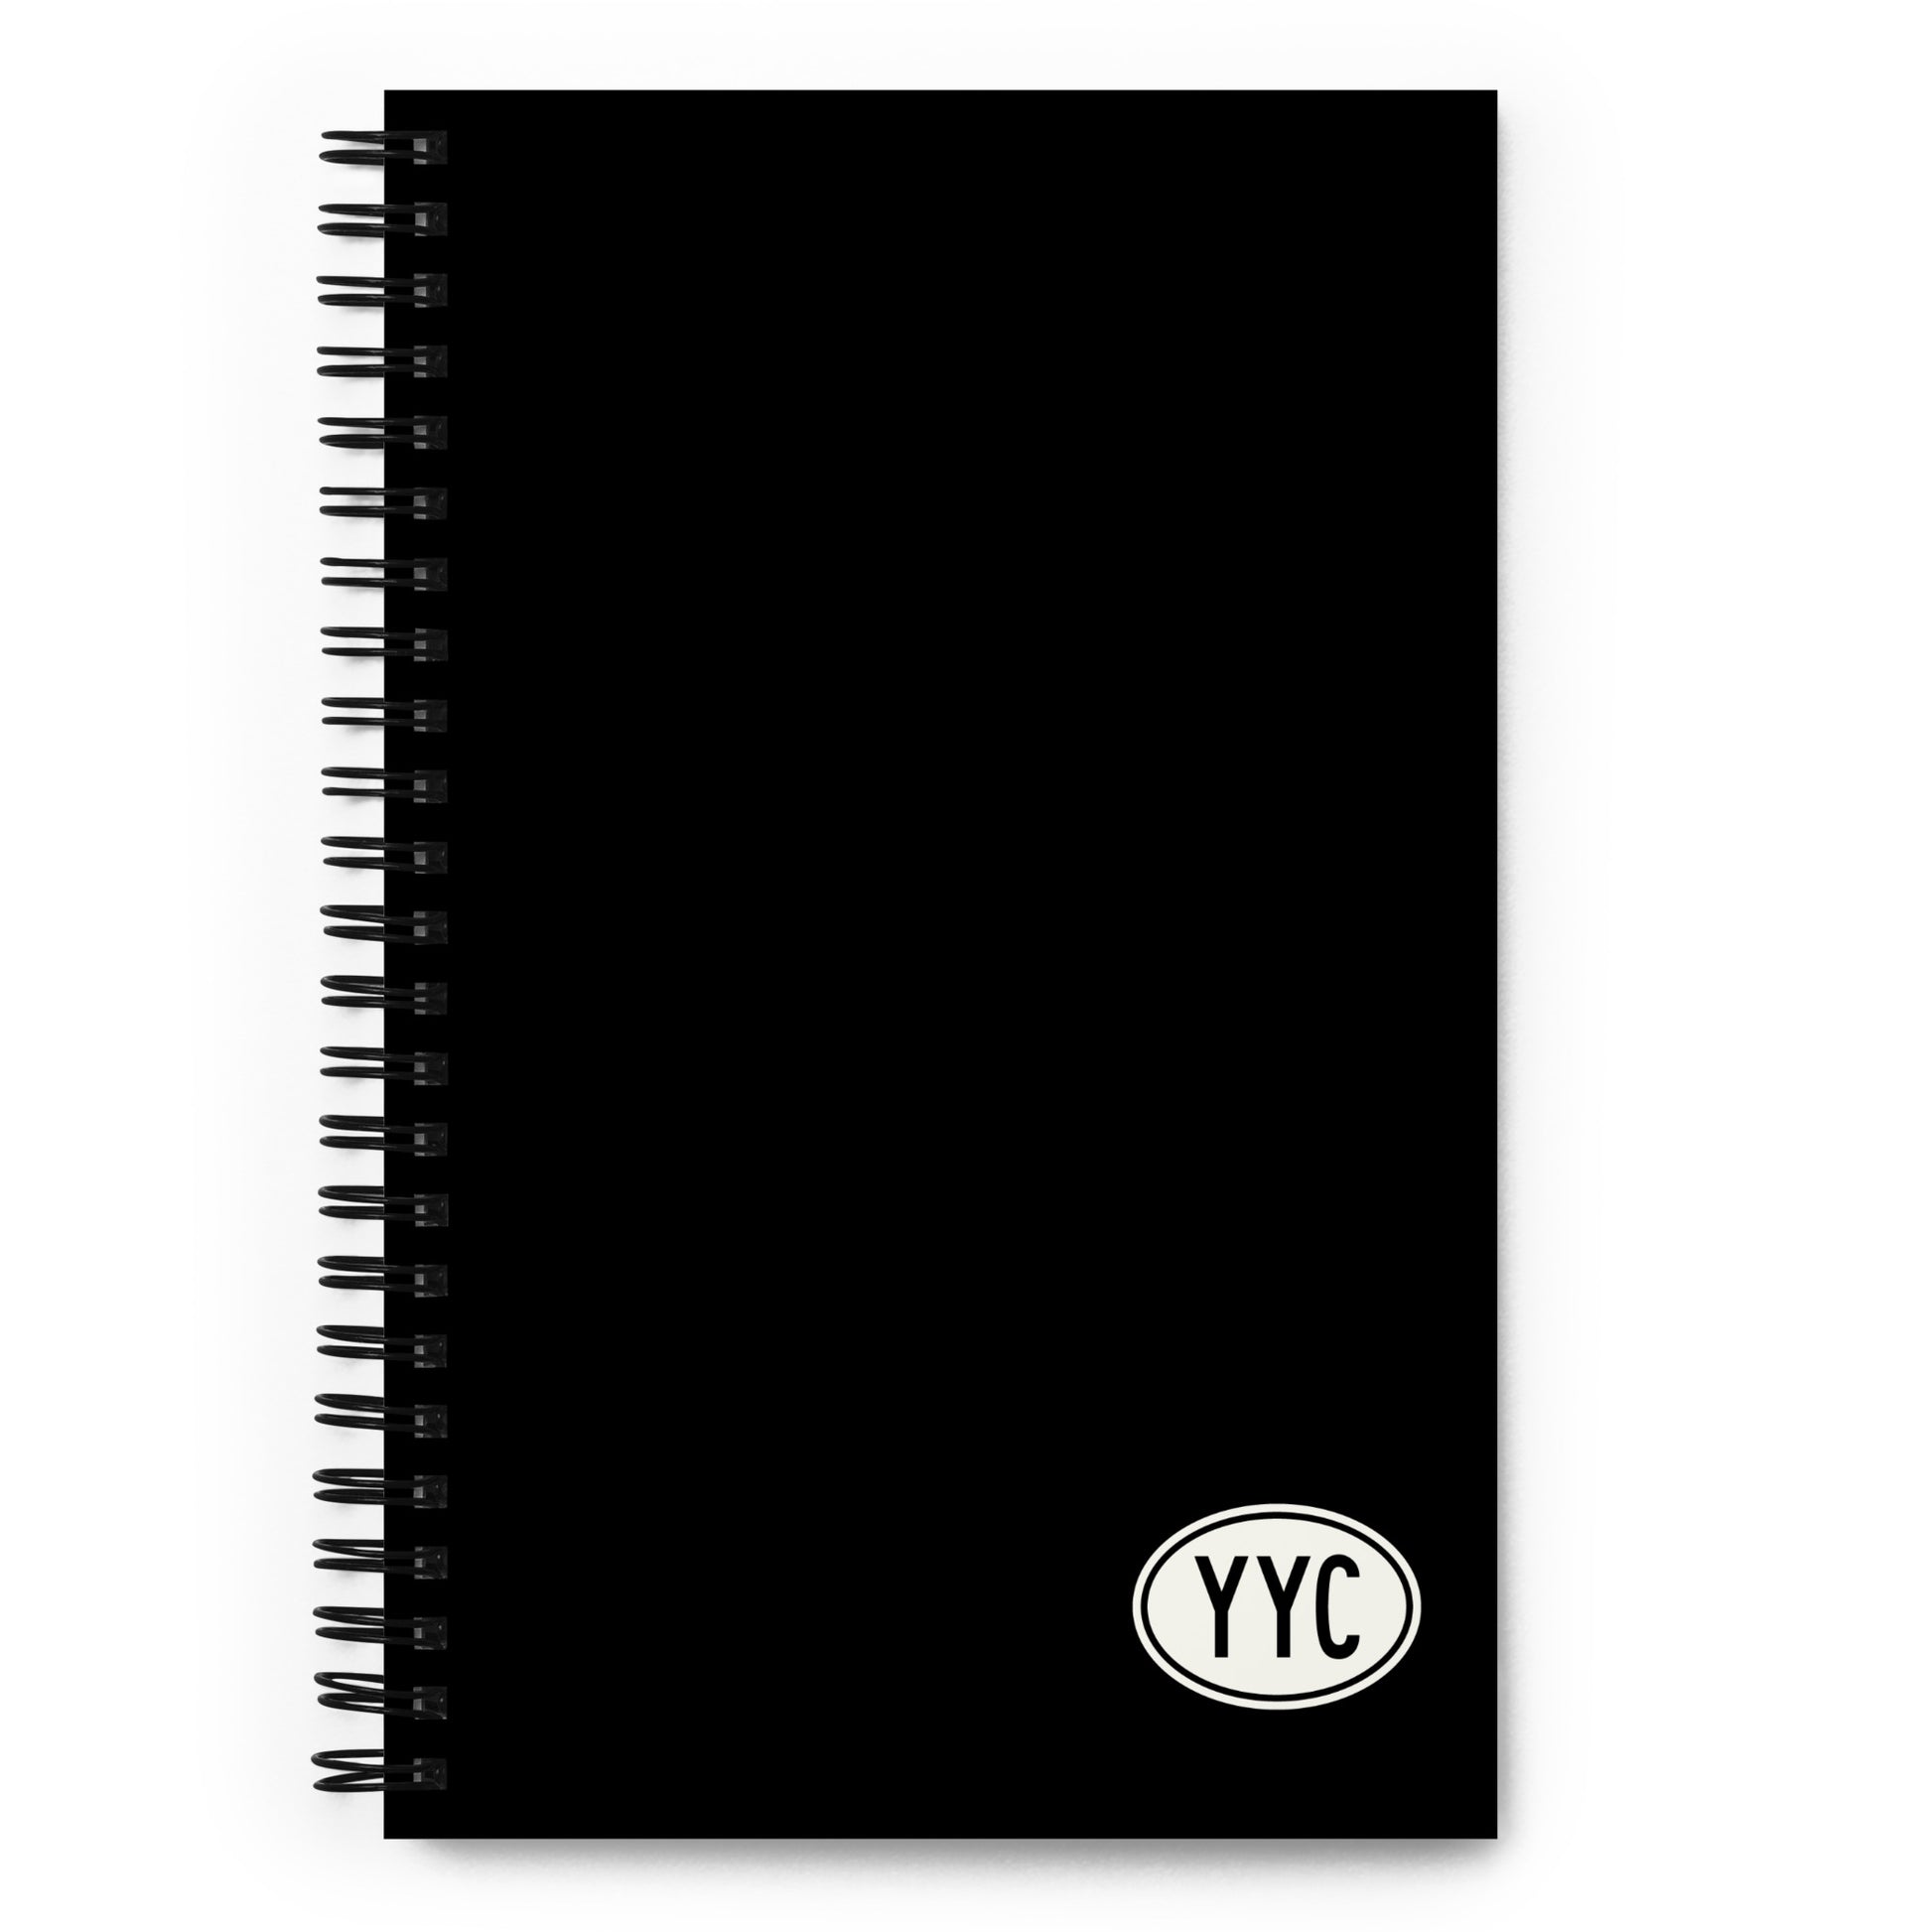 Unique Travel Gift Spiral Notebook - White Oval • YYC Calgary • YHM Designs - Image 01